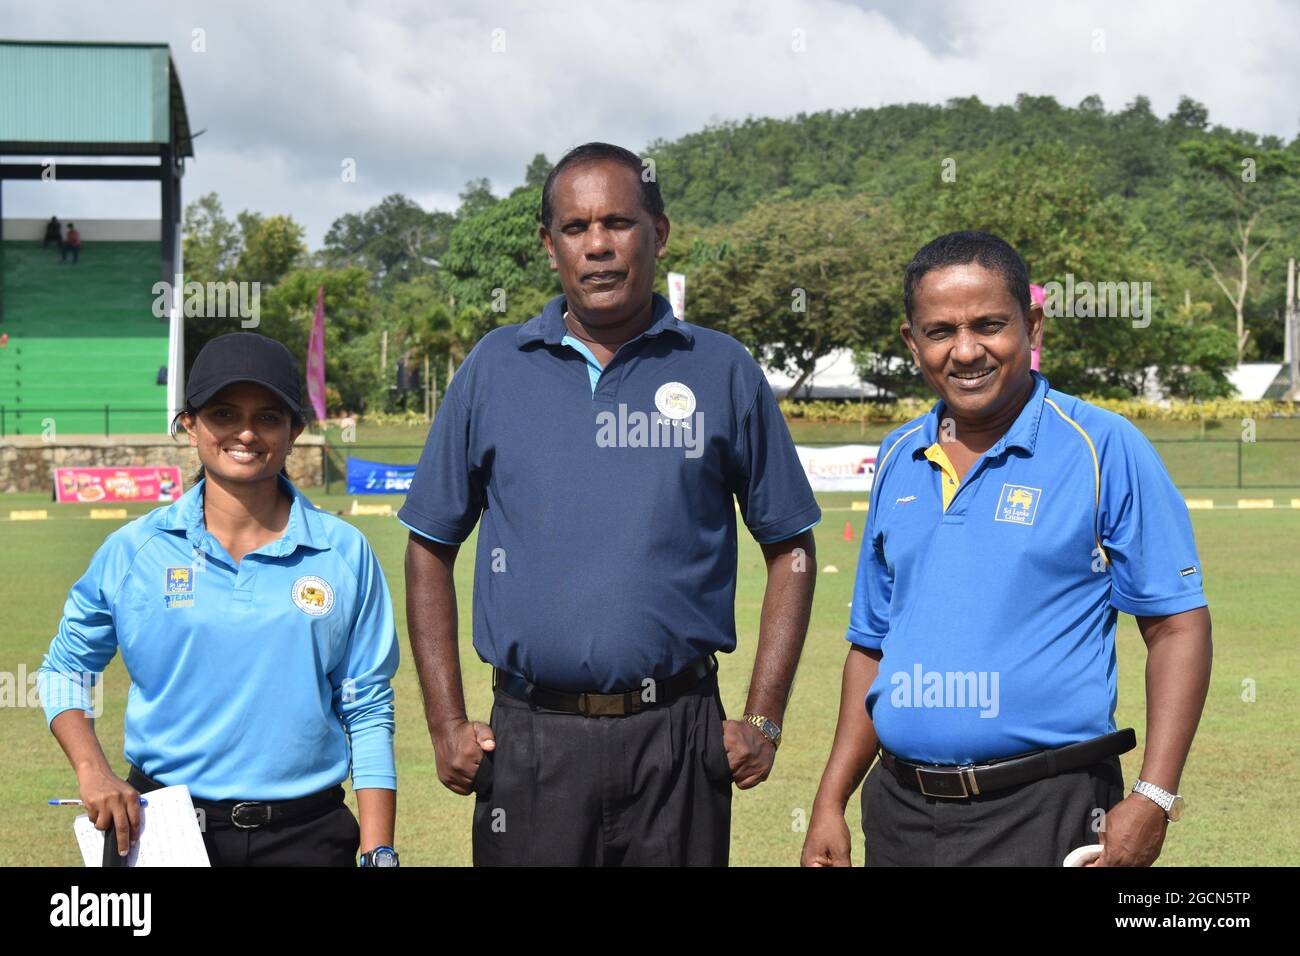 Sri Lanka female cricket umpire with male umpires at a cricket match at the Army Ordinance cricket grounds, Dombagoda. Females who have been involved with cricket as players are taking up umpiring and scoring to be involved with the game. Sri Lanka. Stock Photo